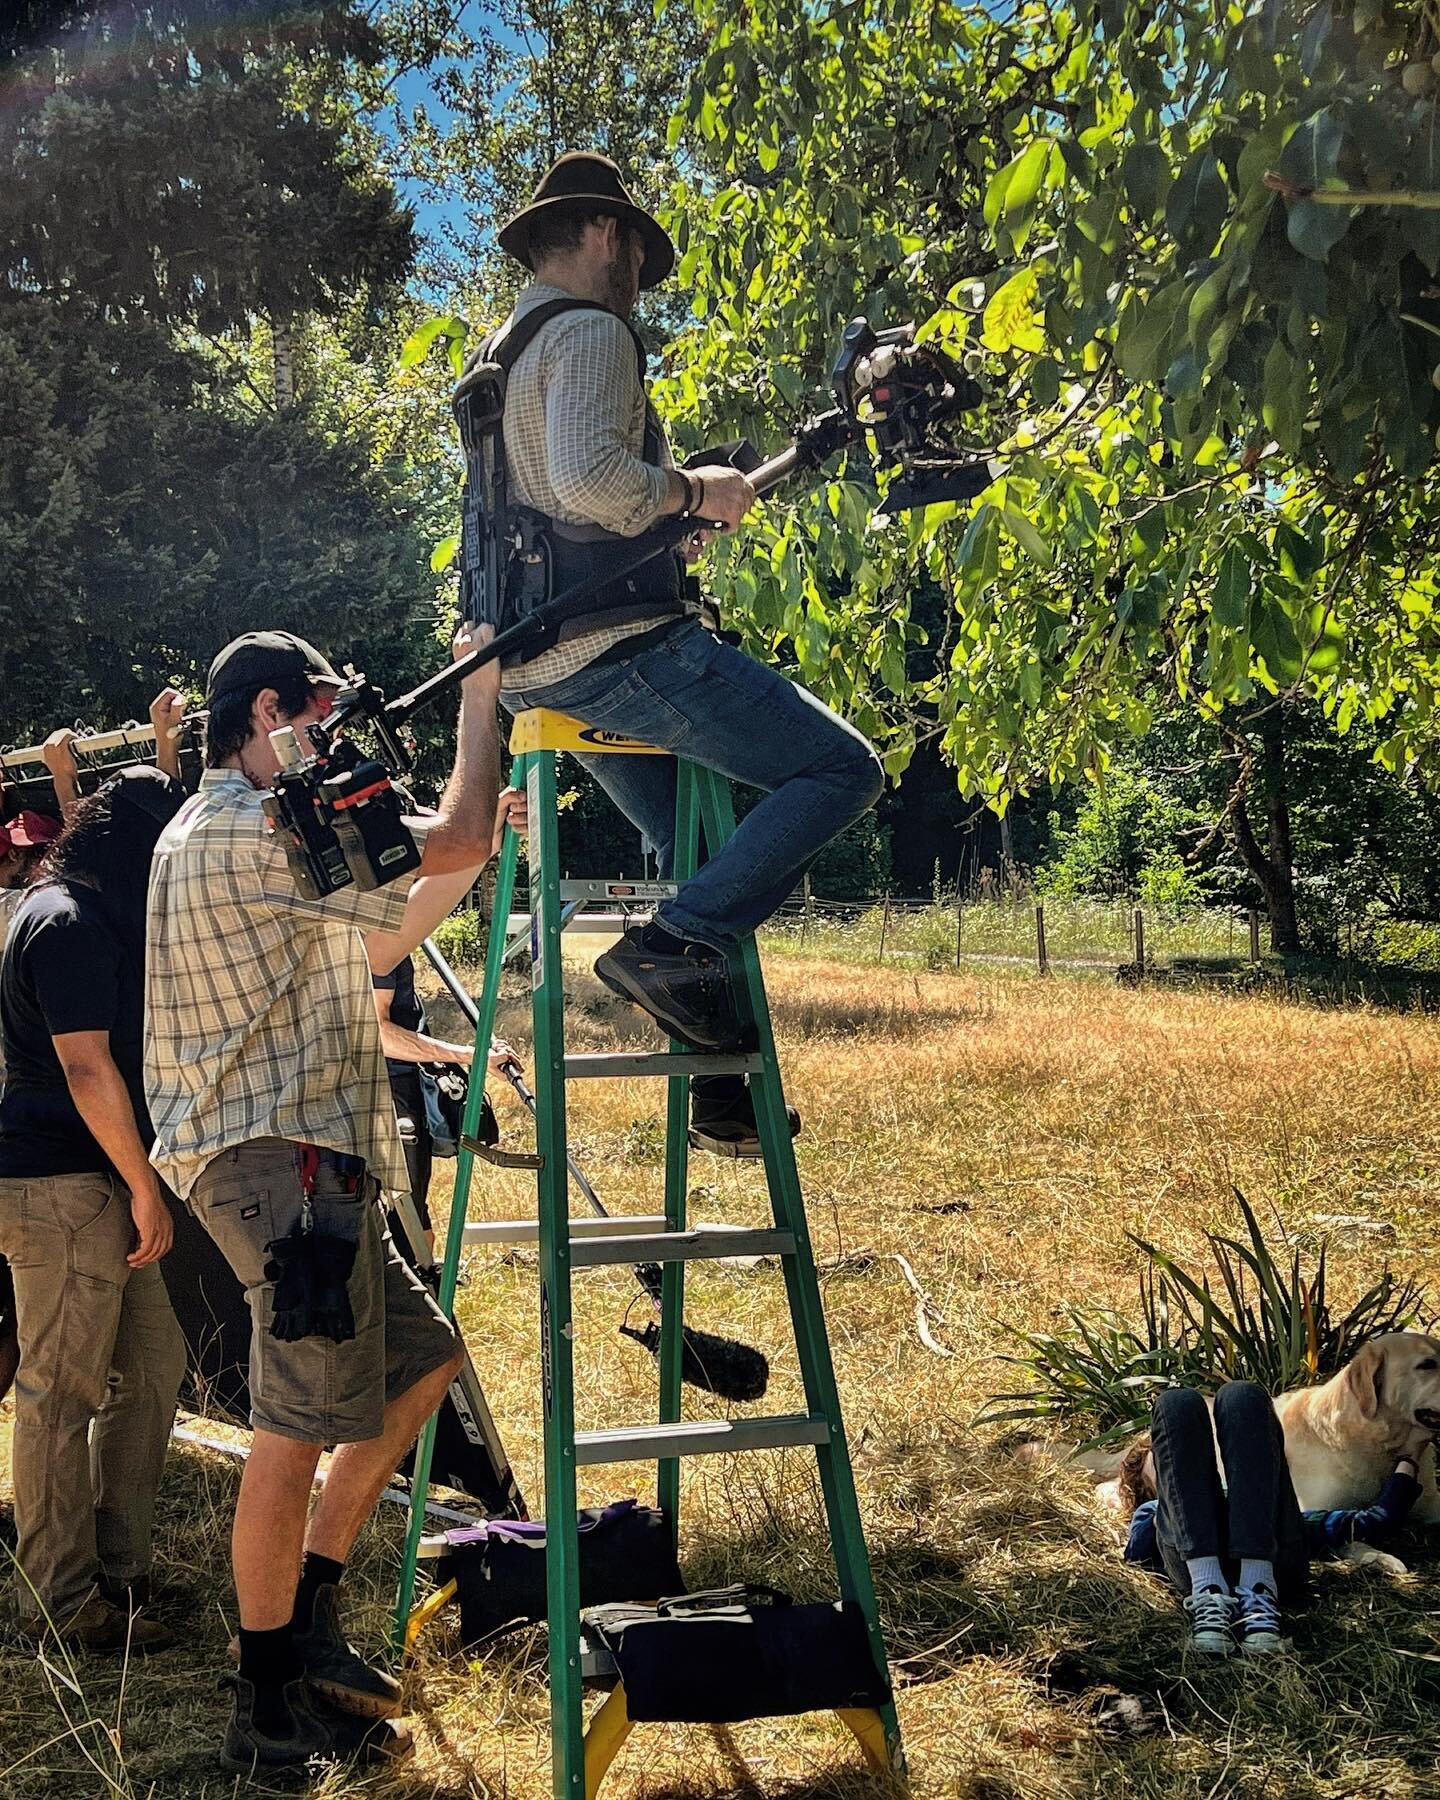 No jib no problem! Captured a really nice shot from above climbing up a small ladder with the Float System on. I felt it was much safer than other options. Thanks to my crew for spotting me and making this shot happen. 
&bull; &bull; &bull;
Directors